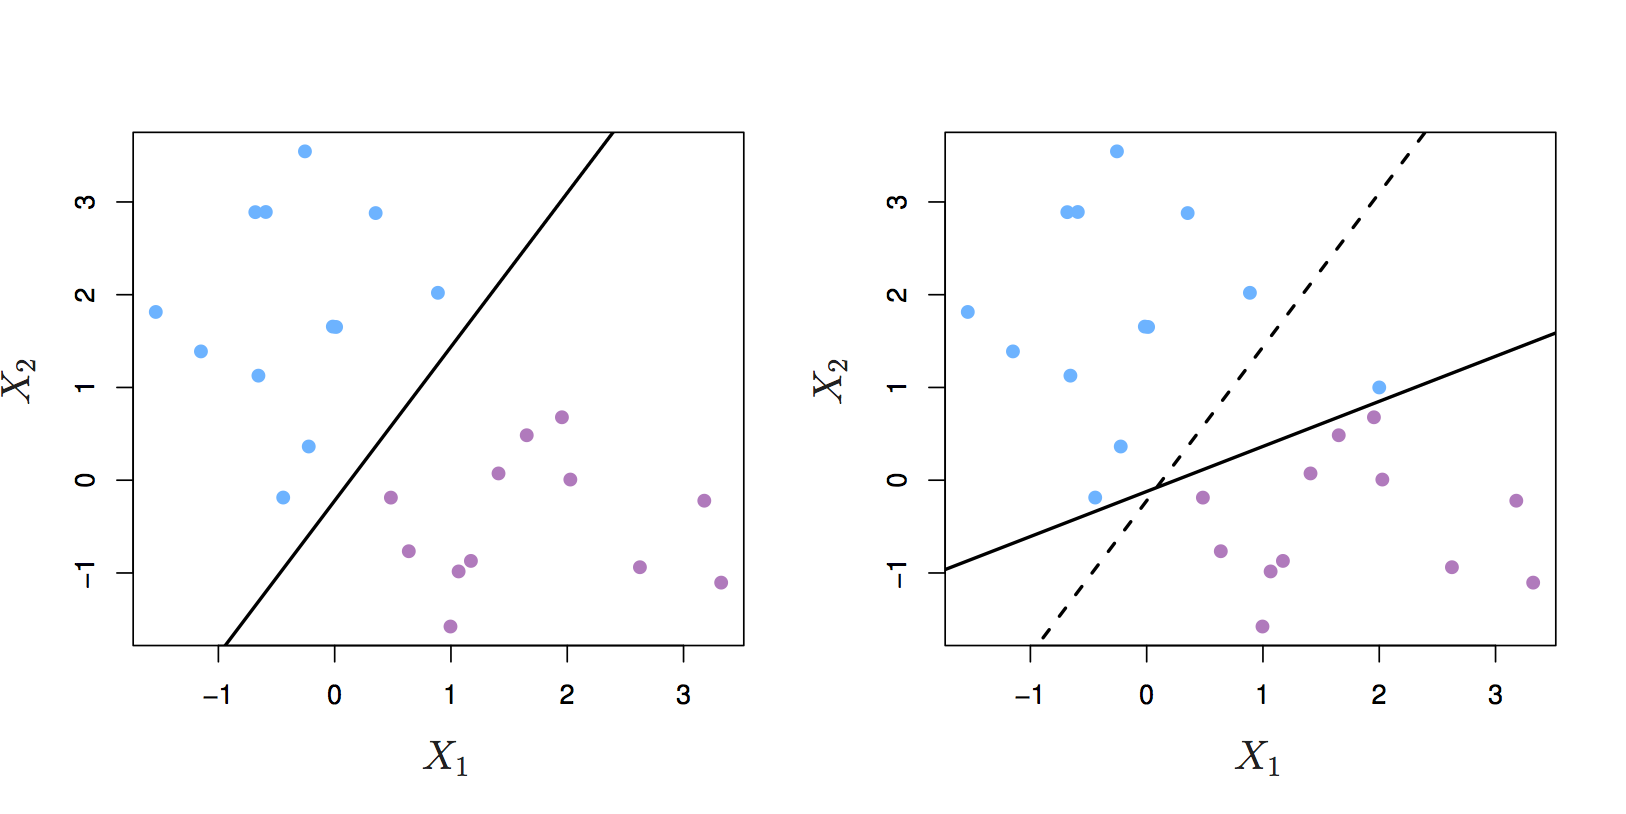 Left: two classes of observations and a maximum margin hyperplane (solid line). Right: Hyperplane (solid line) moves after the addition of a new observation (original hyperplane is dashed line). Source: http://www-bcf.usc.edu/~gareth/ISL/